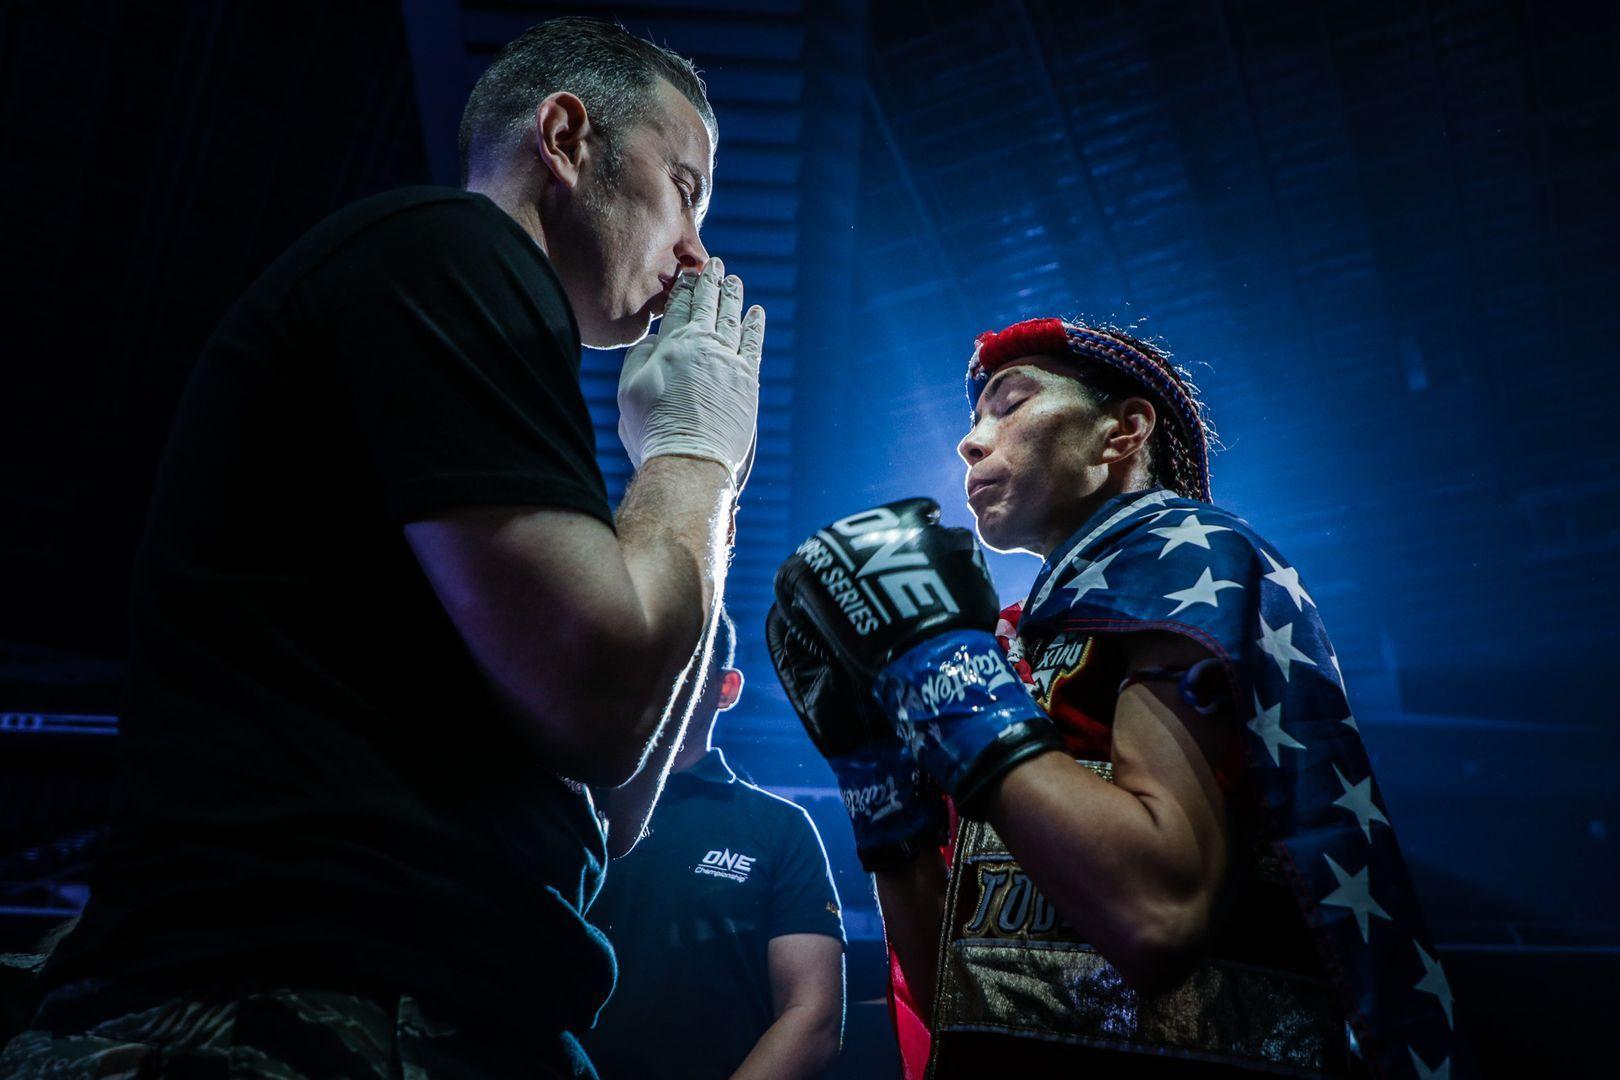 Janet Todd Shares A Prayer With Her Cornerman Before Her Match Against Stamp Fairtex